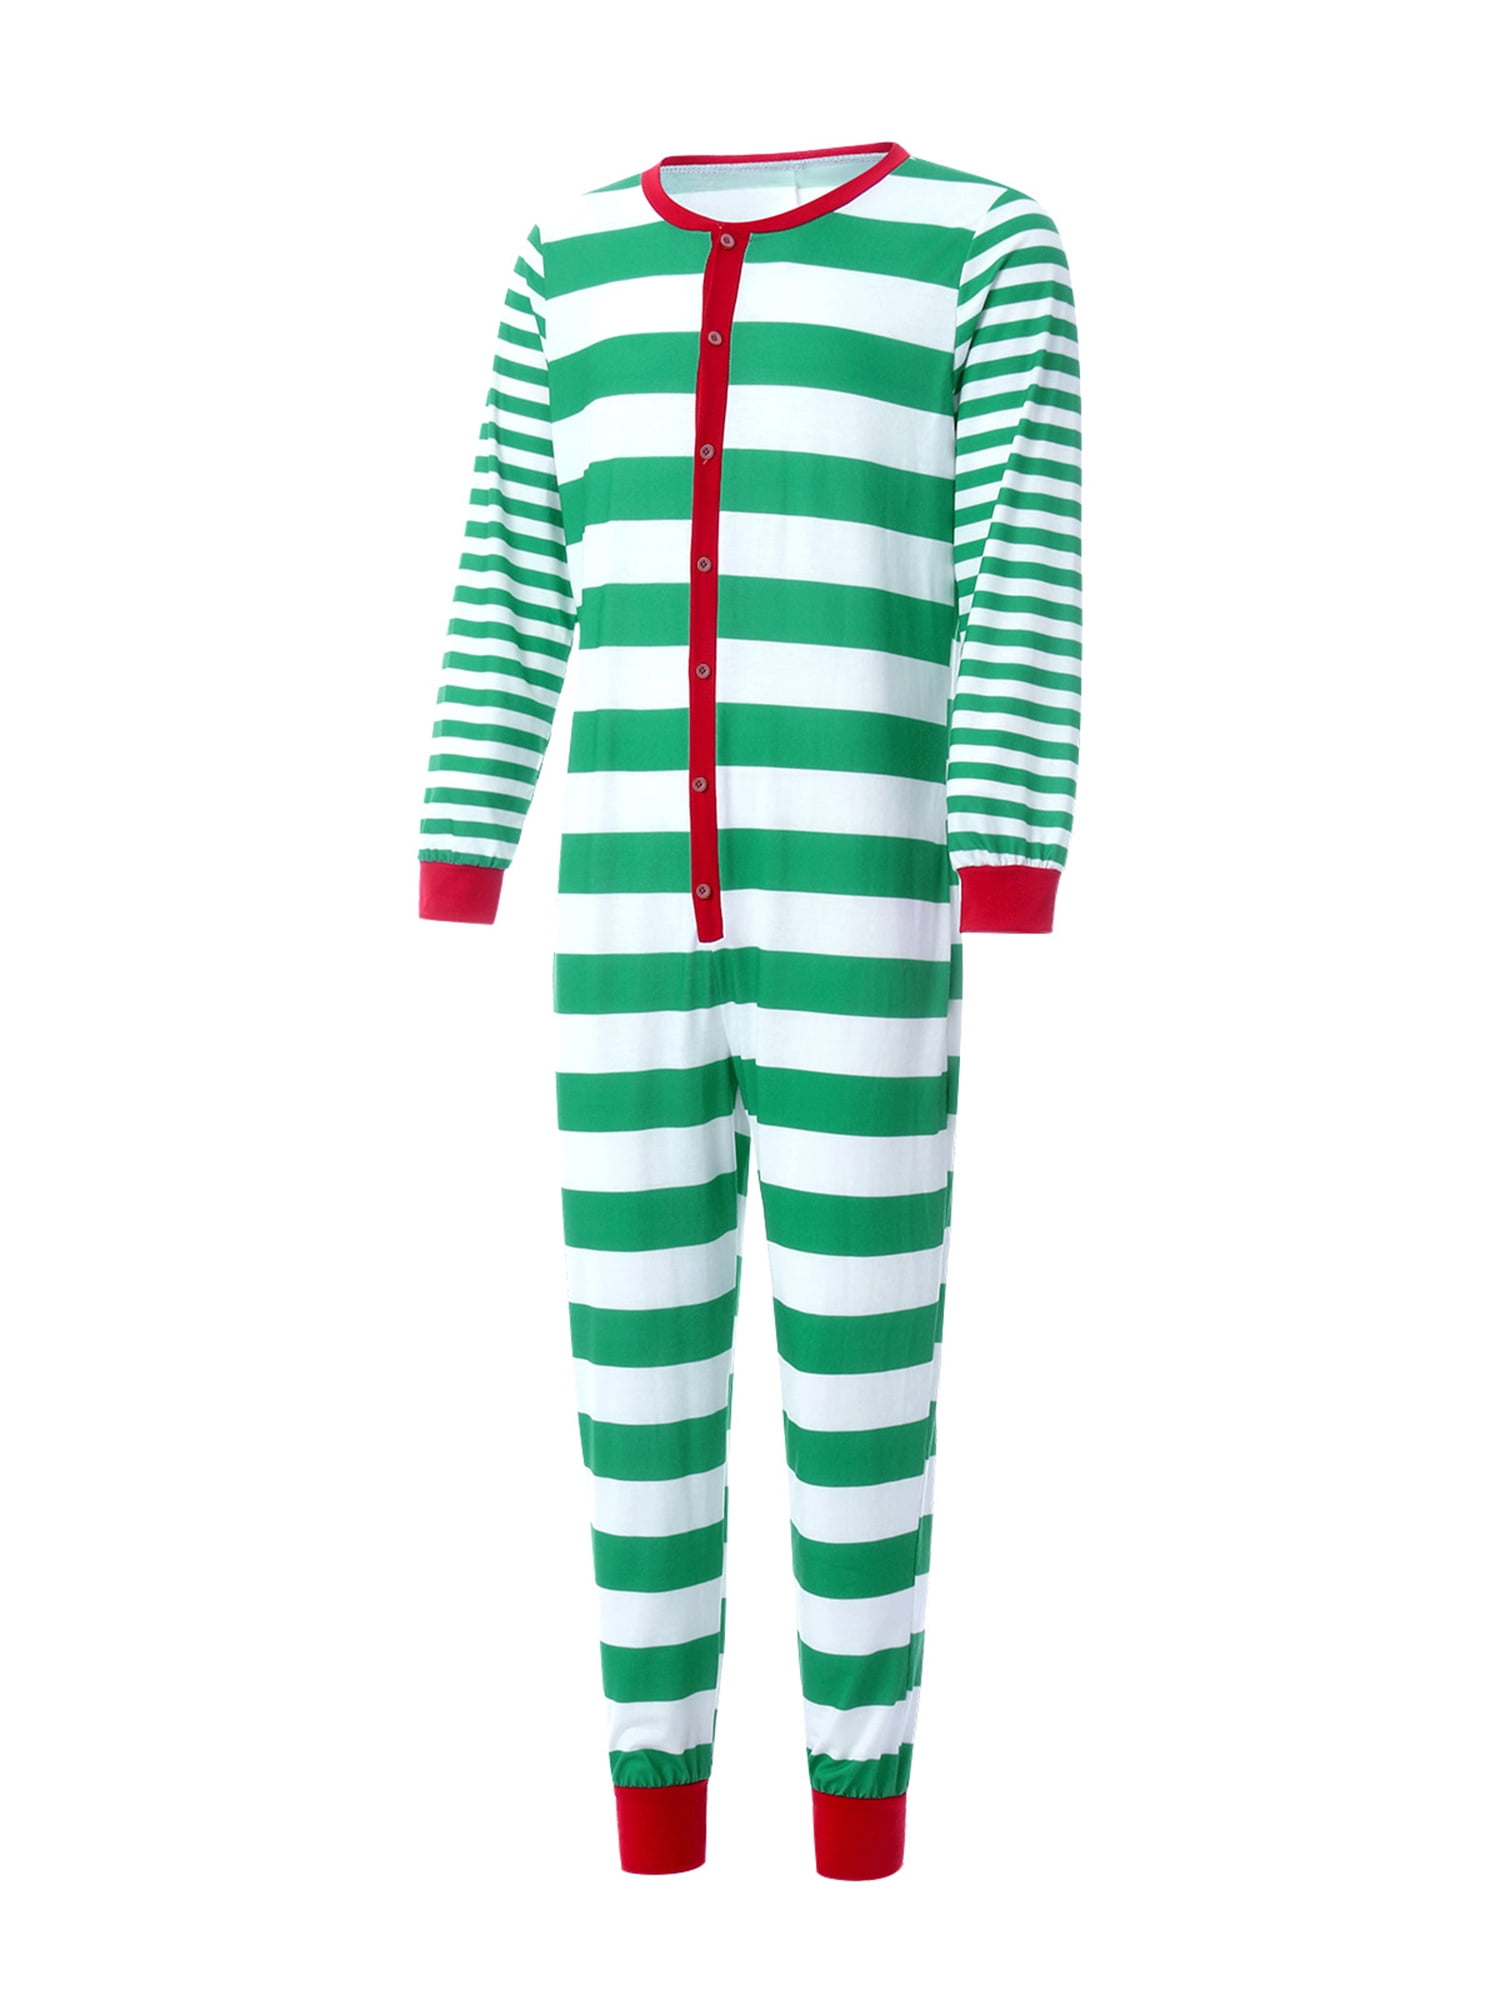 SANNEDONG Family Matching Christmas Onesies Pajamas One Piece Striped  Sleepwear for Adult Kids Baby 